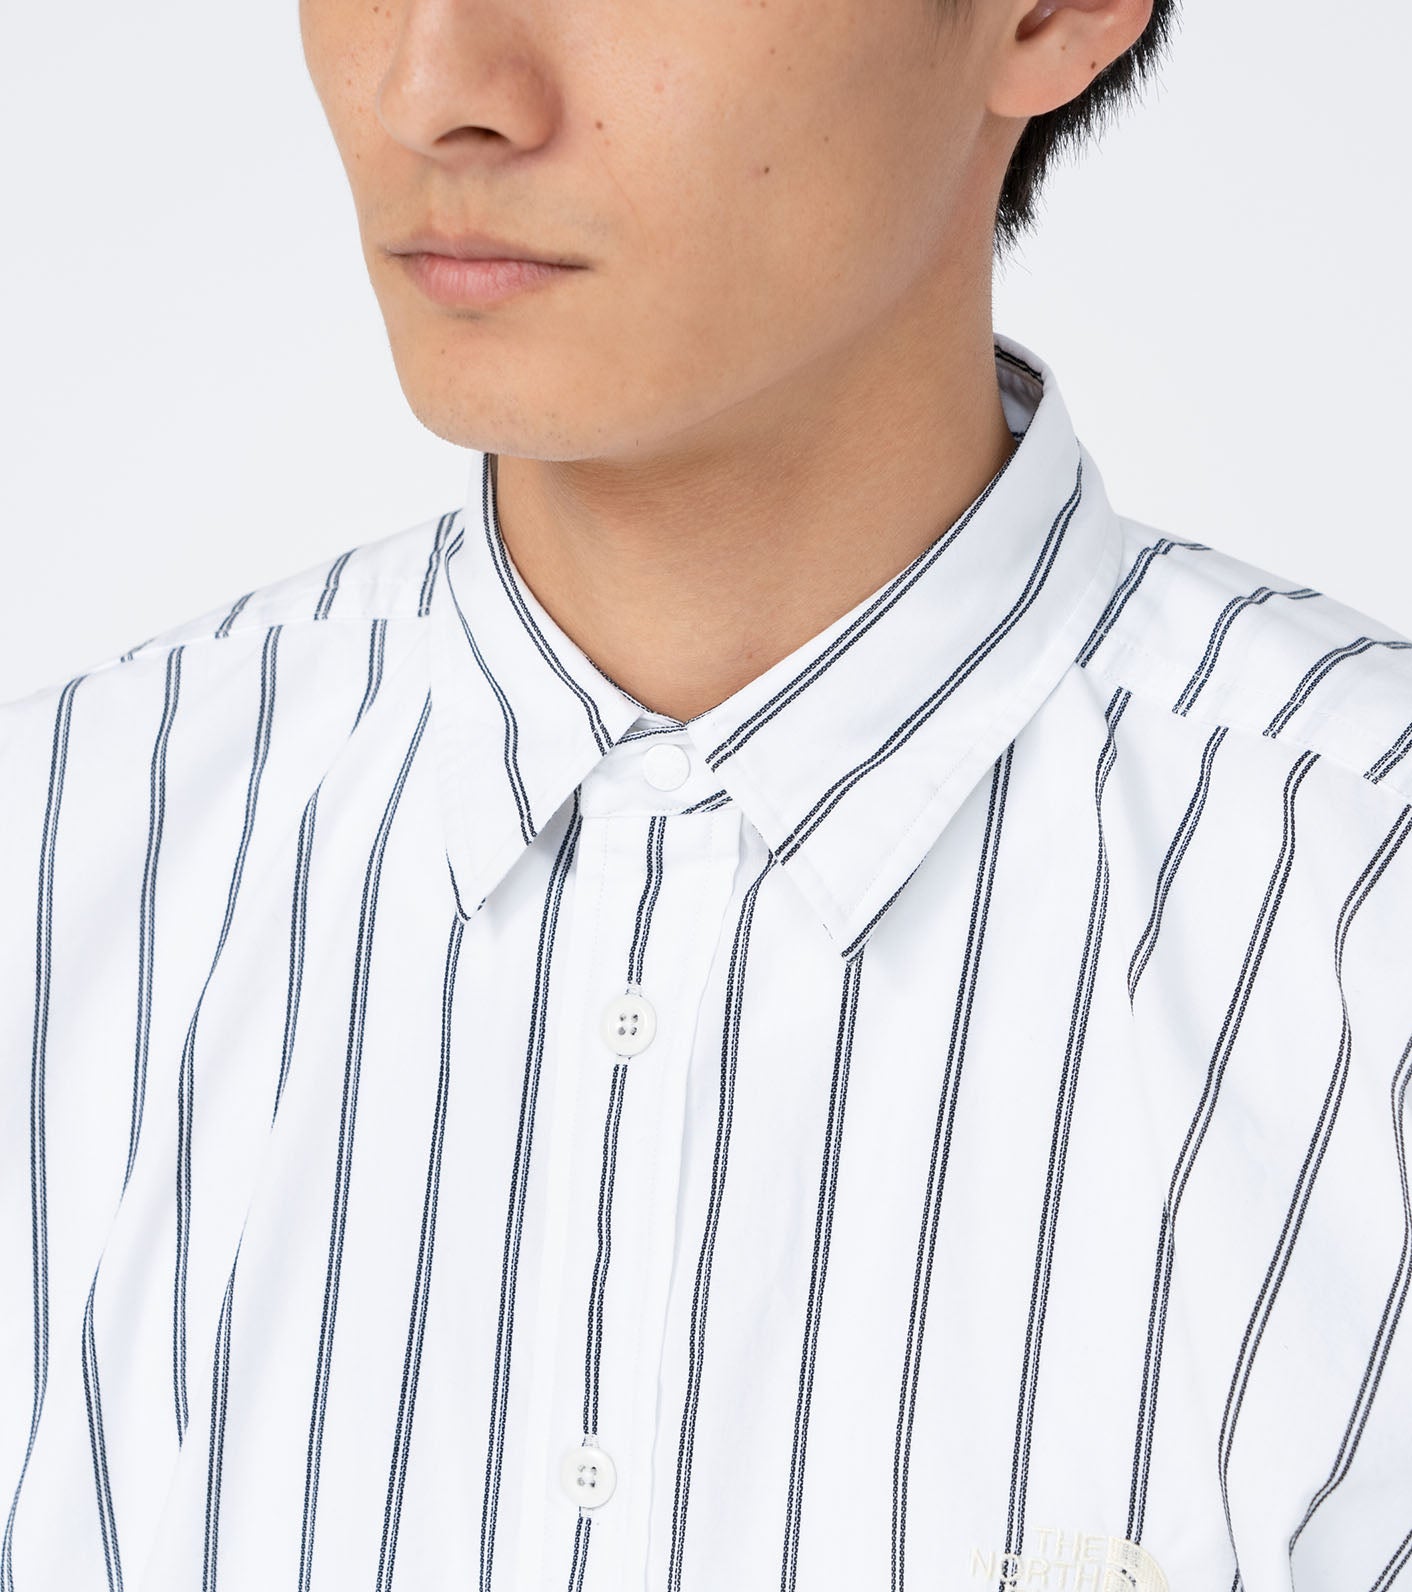 THE NORTH FACE PURPLE LABEL Striped Field Shirt